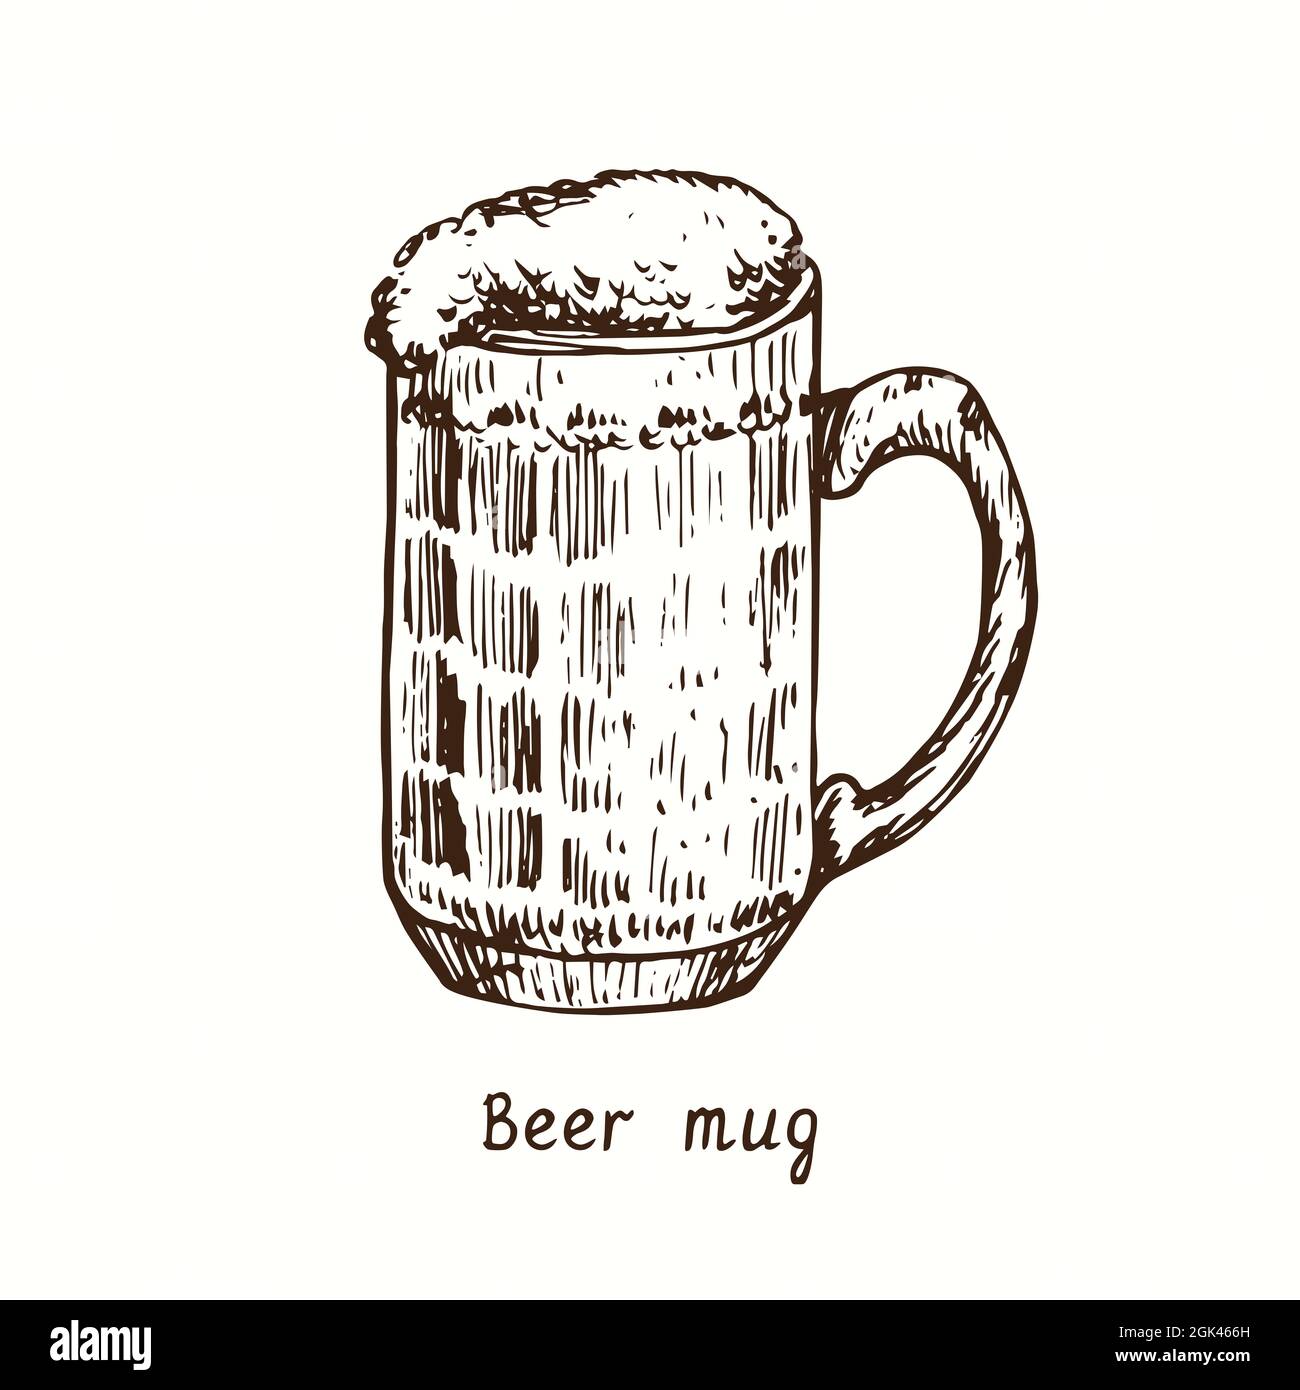 Dimpled beer mug. Ink black and white doodle drawing in woodcut style. Stock Photo